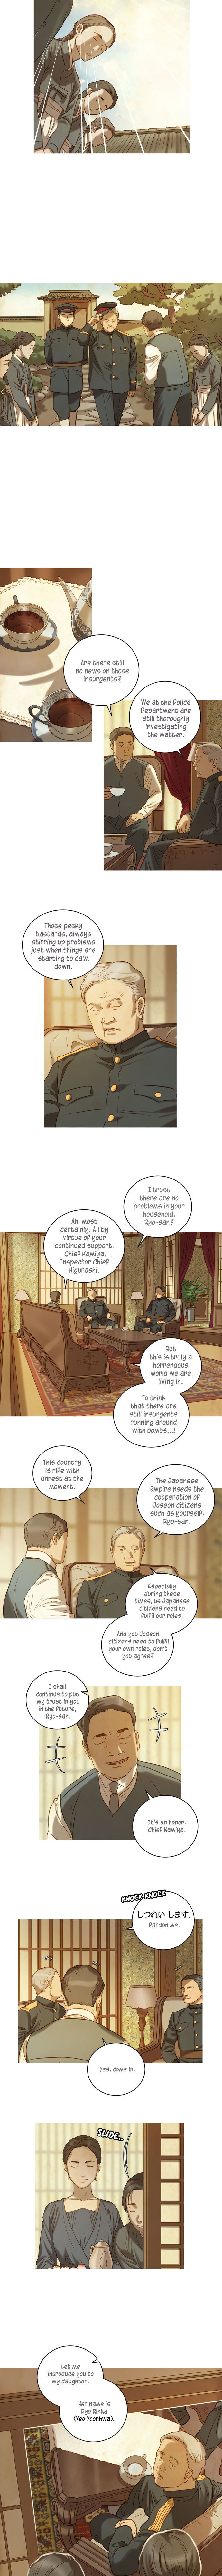 Gorae Byul - The Gyeongseong Mermaid - Chapter 3 Page 9